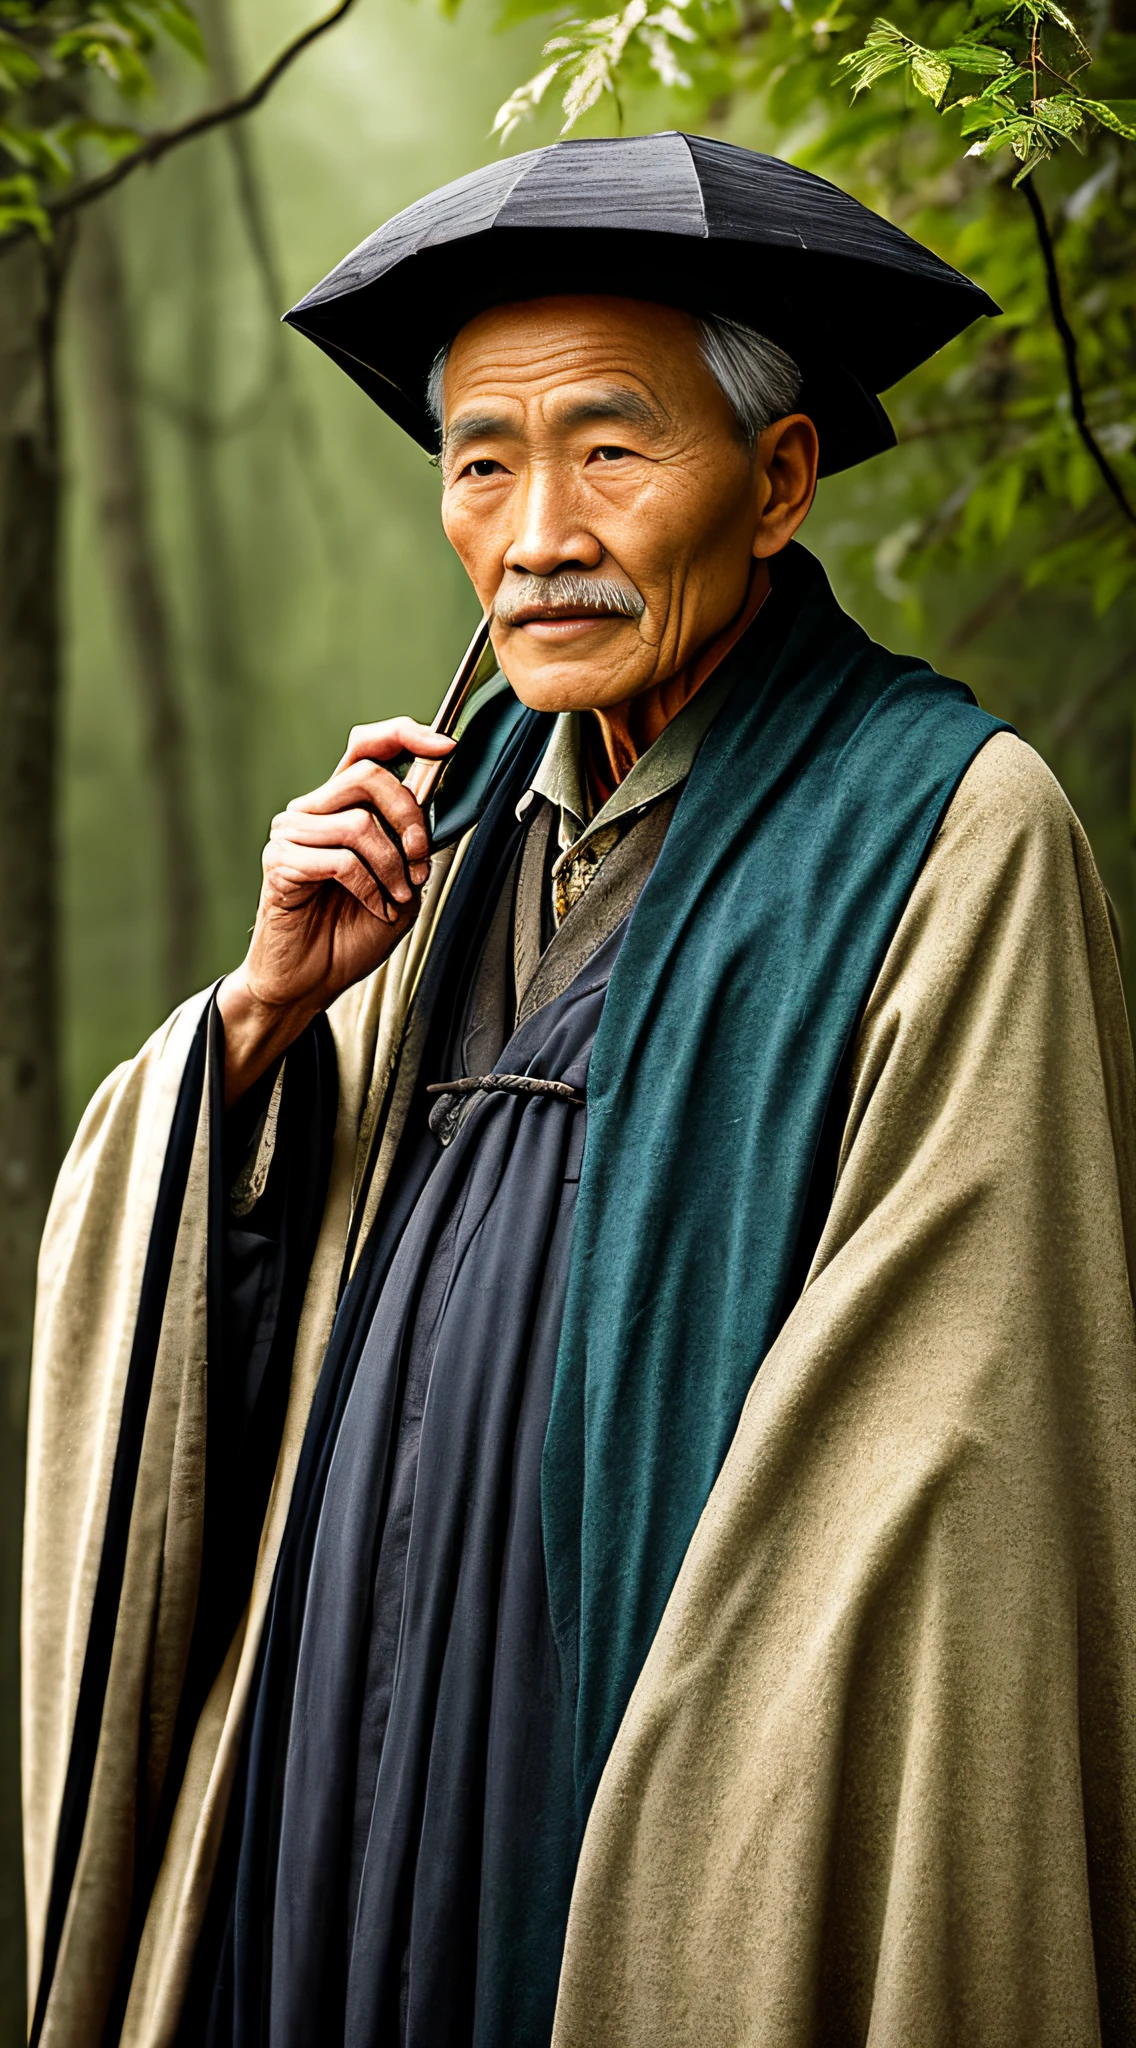 Portrait photography style, world masterpiece, super unique high professional digital art, film format, hyper-realism, color cinematography with ultra-fine details and quality, background is deep in the forest, an old man in rural China, an old man with wisdom. He wears an old cloak and his eyes are kind and shrewd. His skin has been blackened and powerful by the sun and rain, and the wrinkles are fixed on the corners of his mouth and forehead, making it seem that his years have precipitated. Although wearing a dark gown, although simple in appearance, it exudes sublime wisdom and a sense of tenacity of strength.